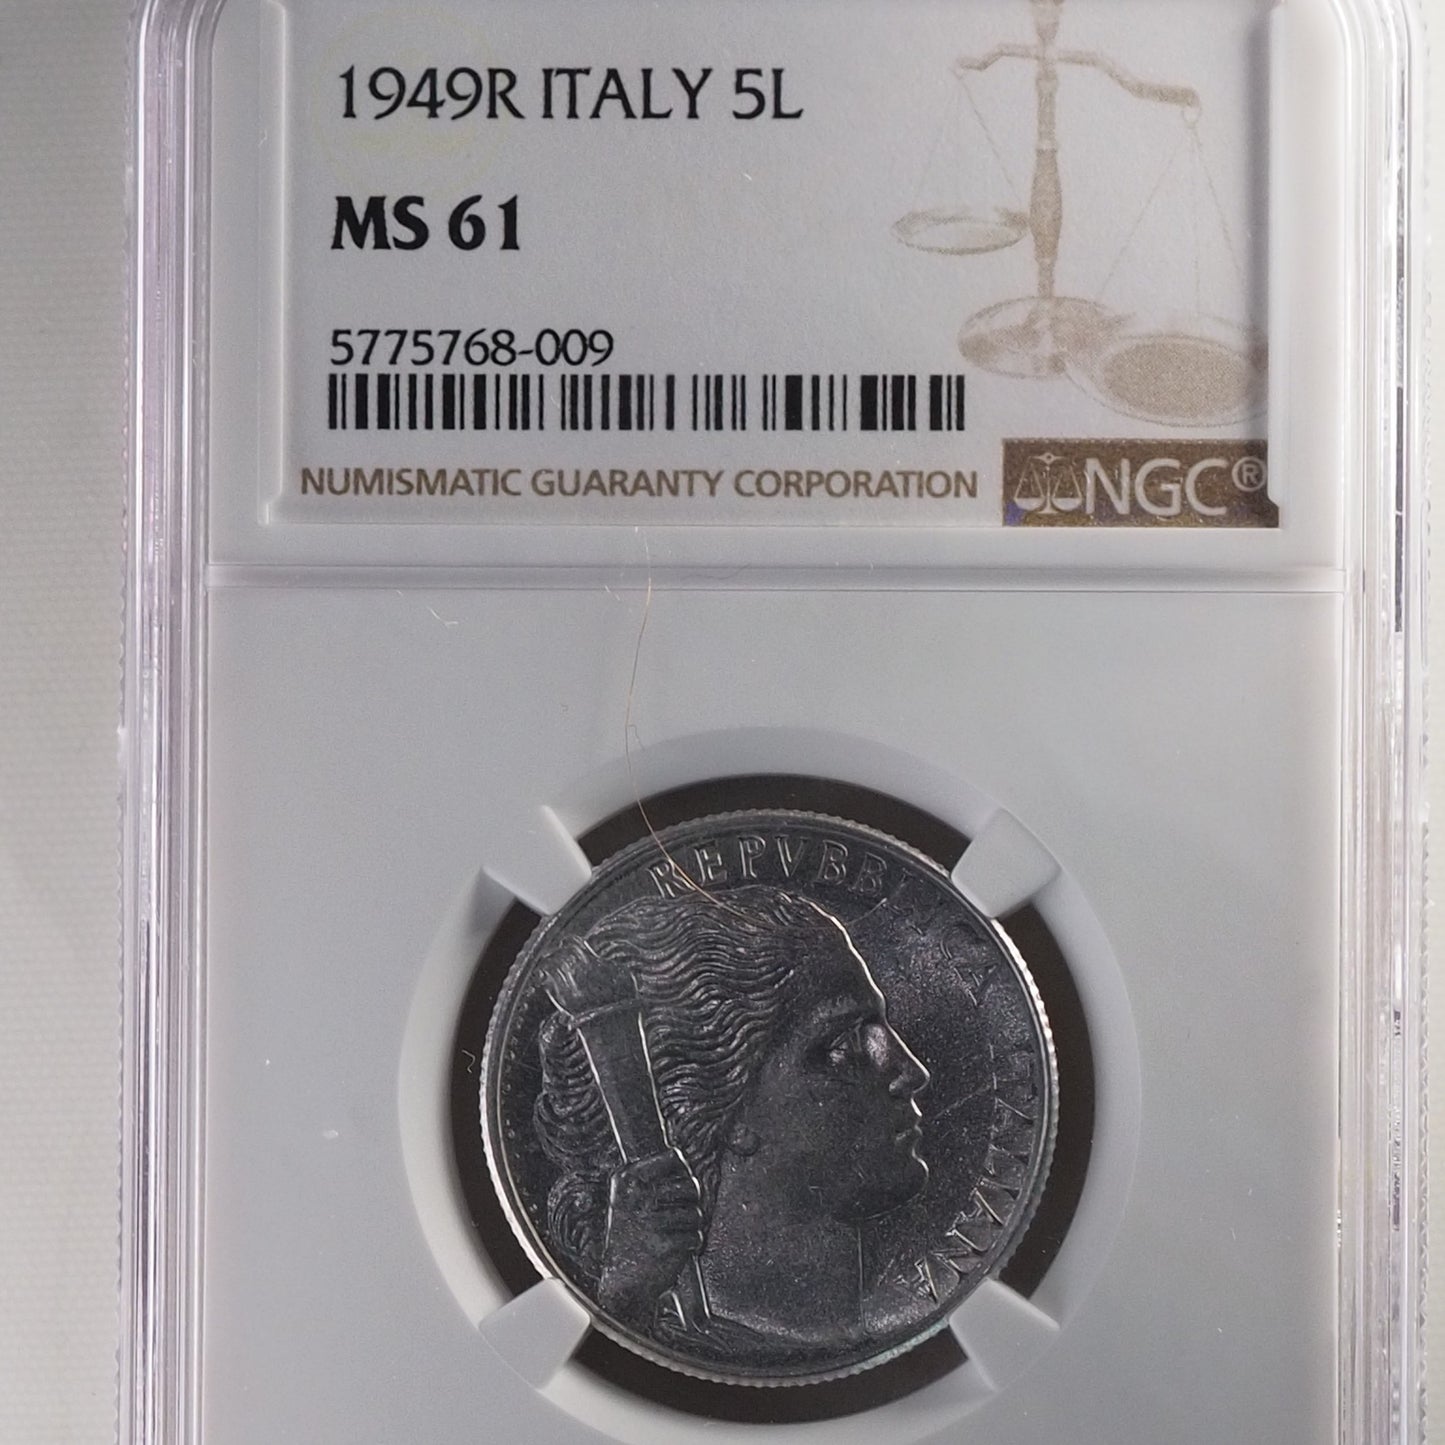 1949R ITALY 5L MS 61 (Certification: 5775768-0090NGC) Coin